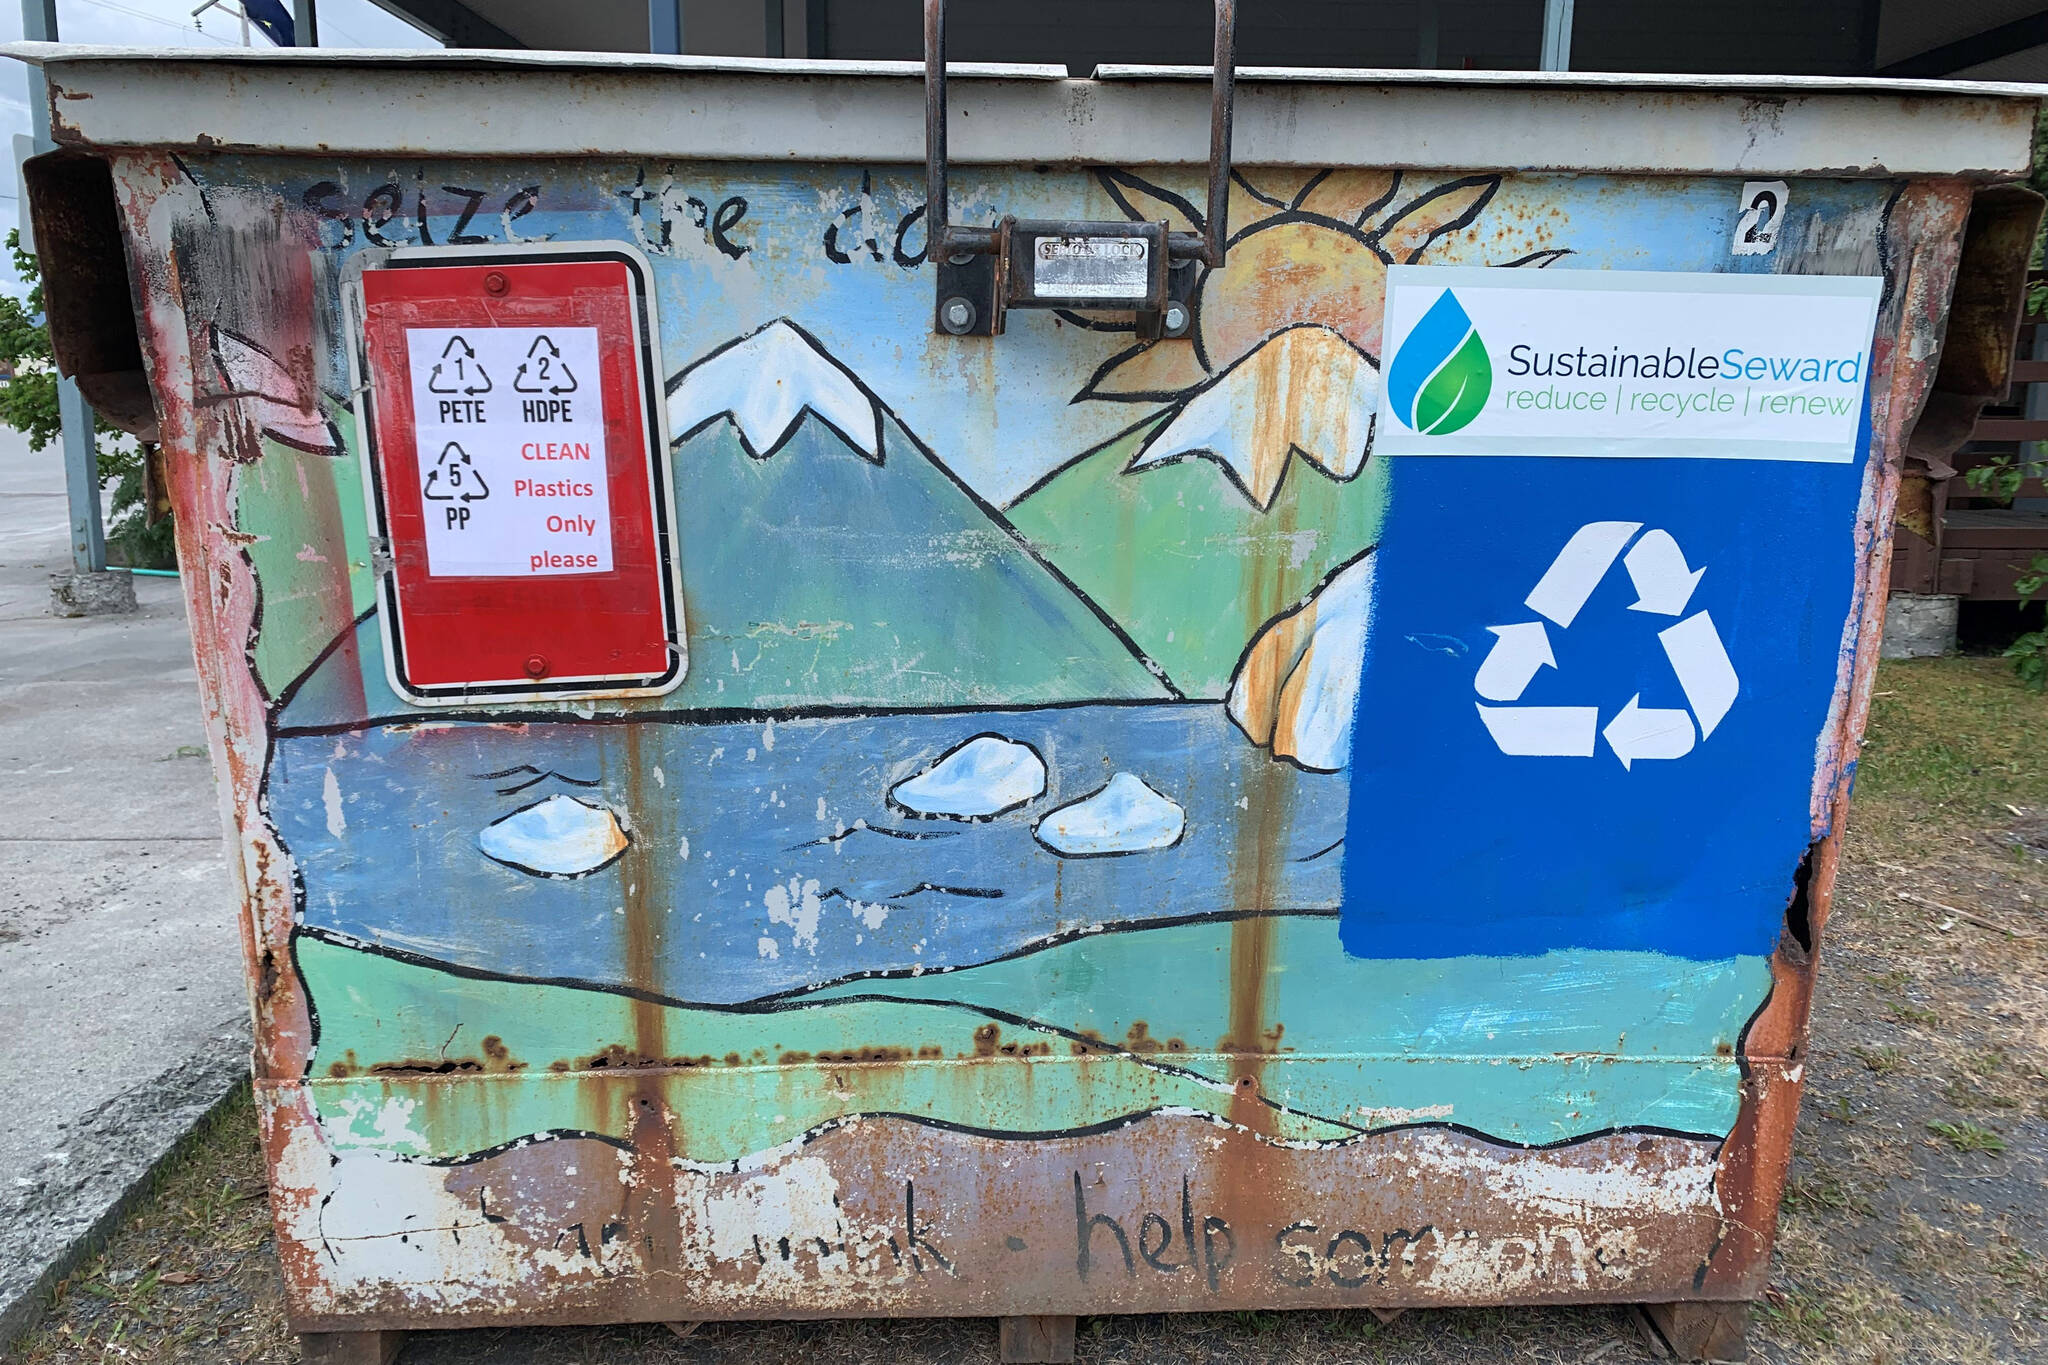 Recycling signage is displayed on an upscaled dumpster used to collect plastics as part of a project to turn discarded plastic waste into artificial lumber, in Seward, Alaska. (Photo courtesy Lori Landstrom)